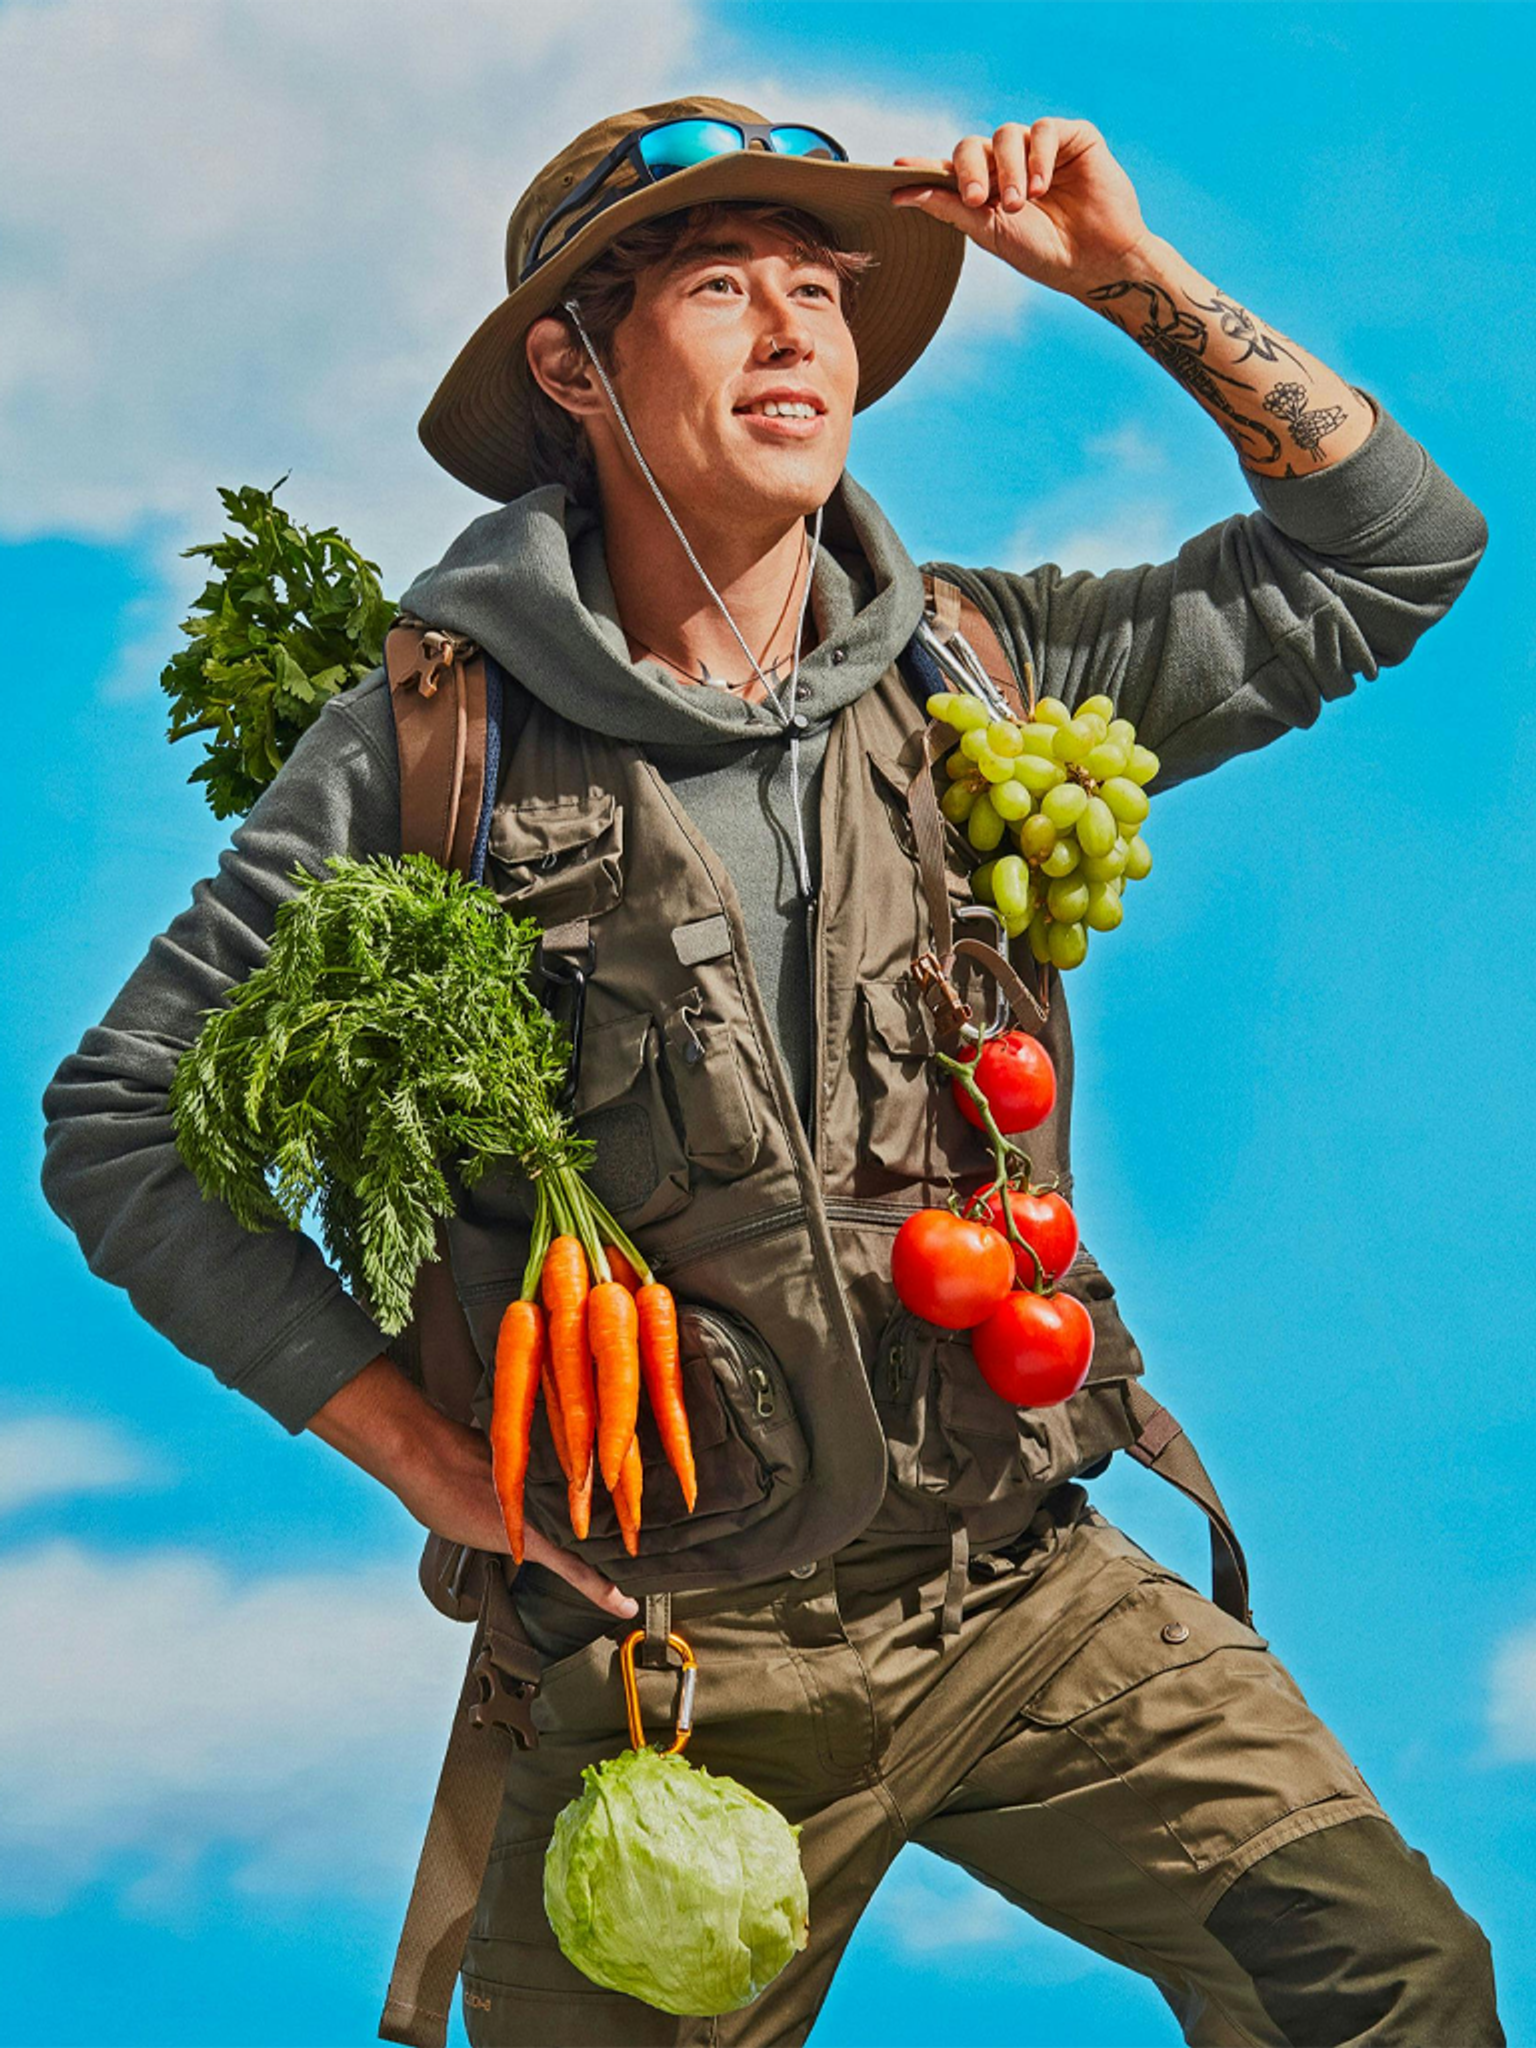 A person in hiking gear adorned with fresh produce under a clear blue sky.